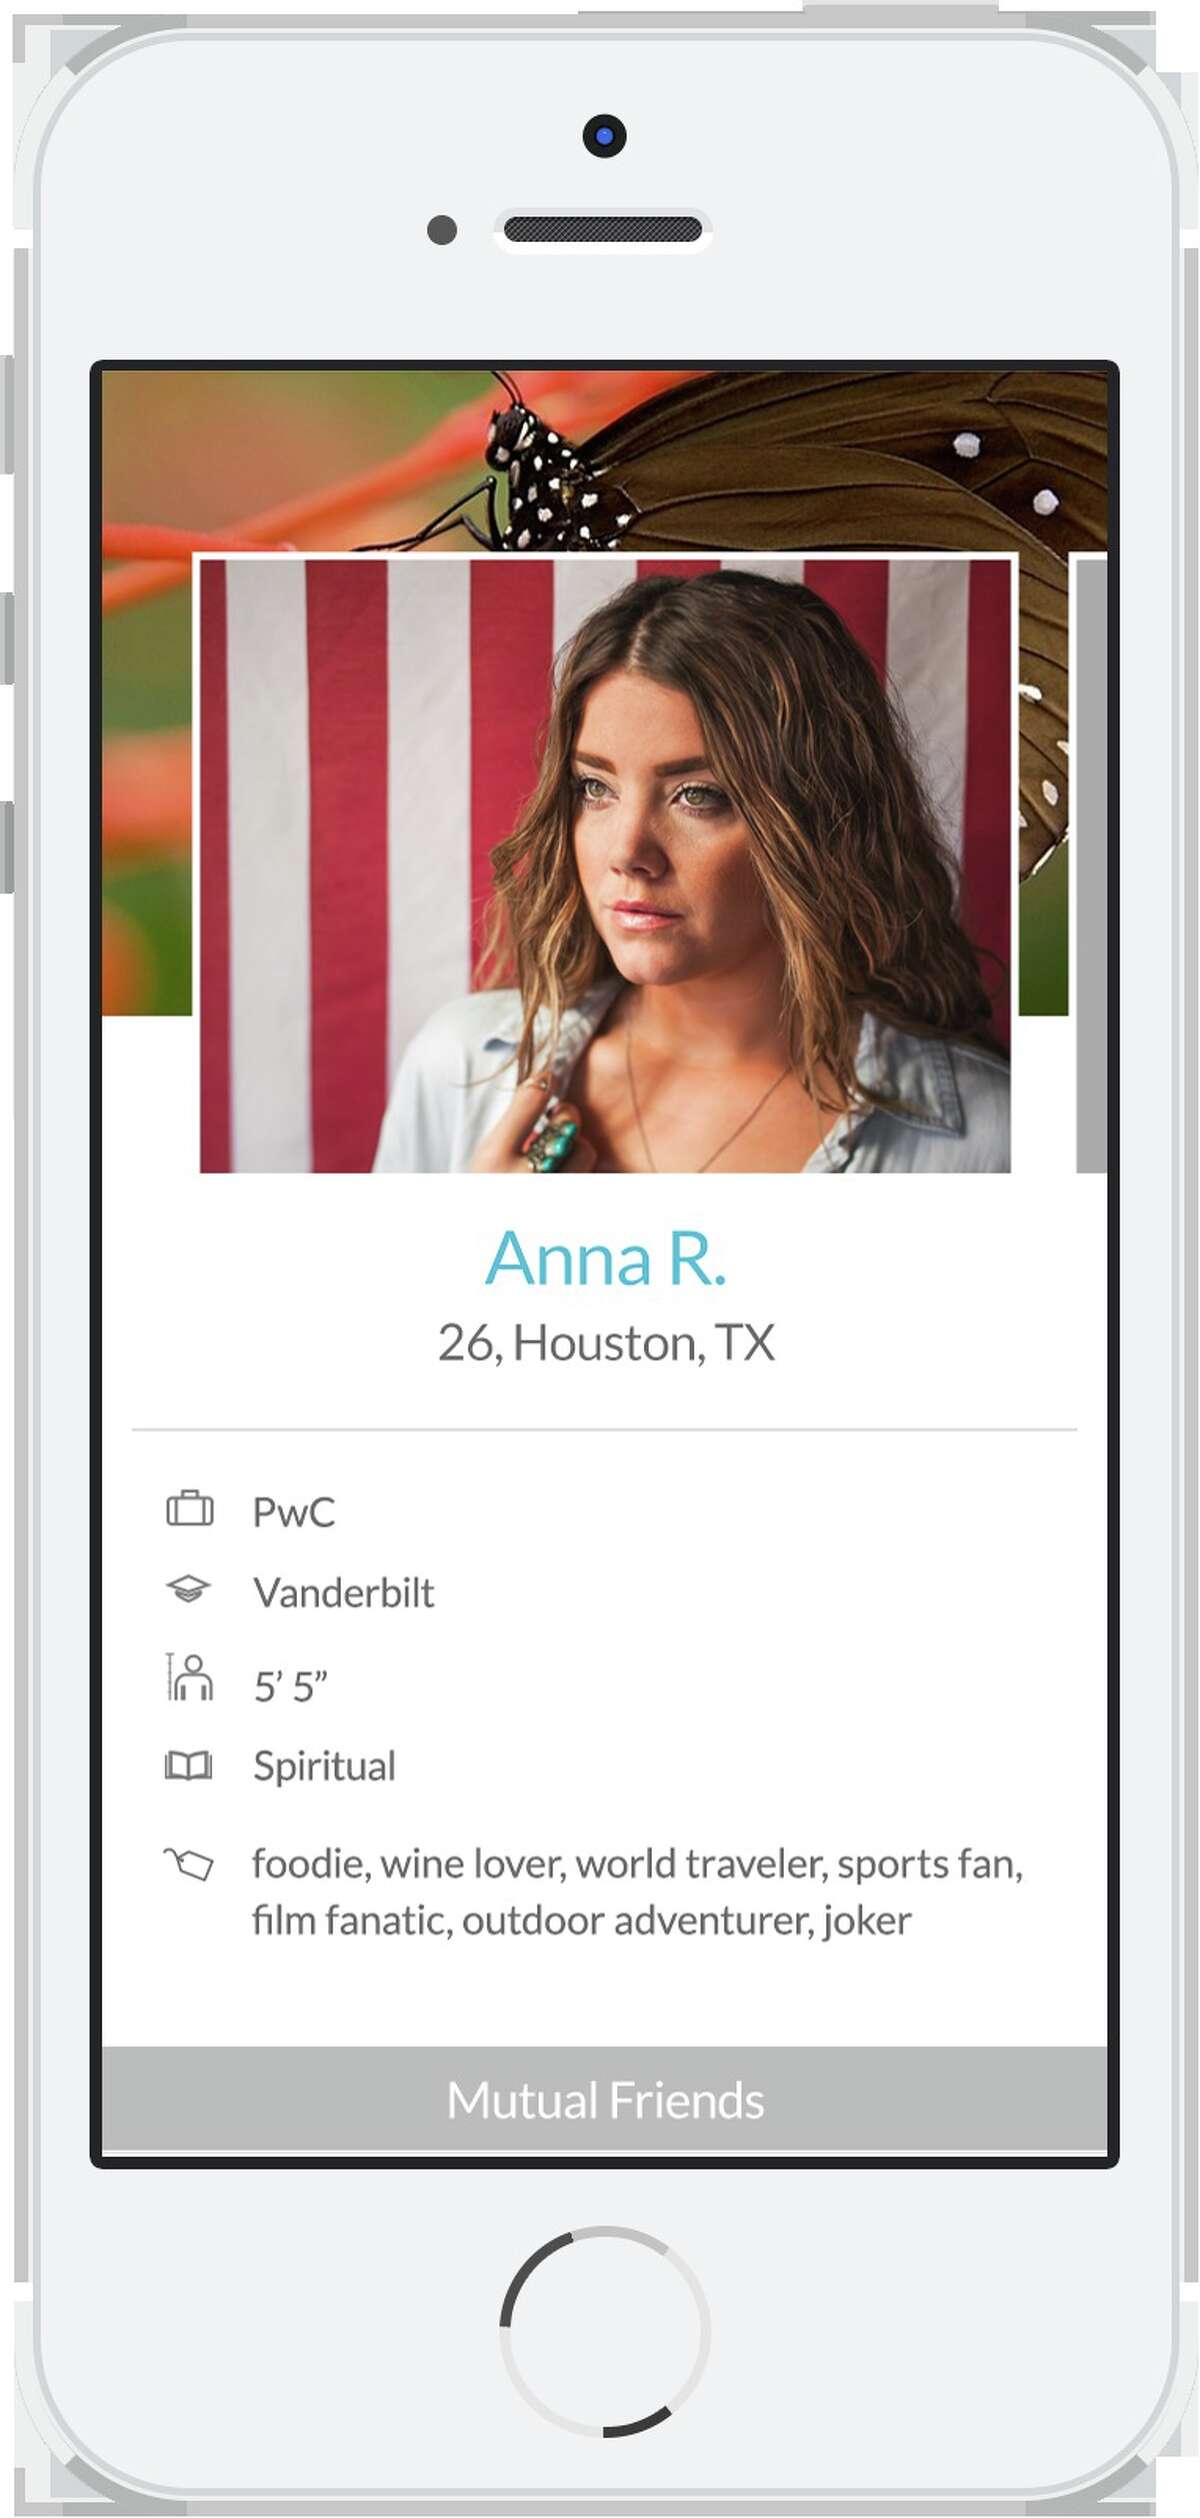 The dating app Hinge allows users to see how many Facebook friends they have in common.